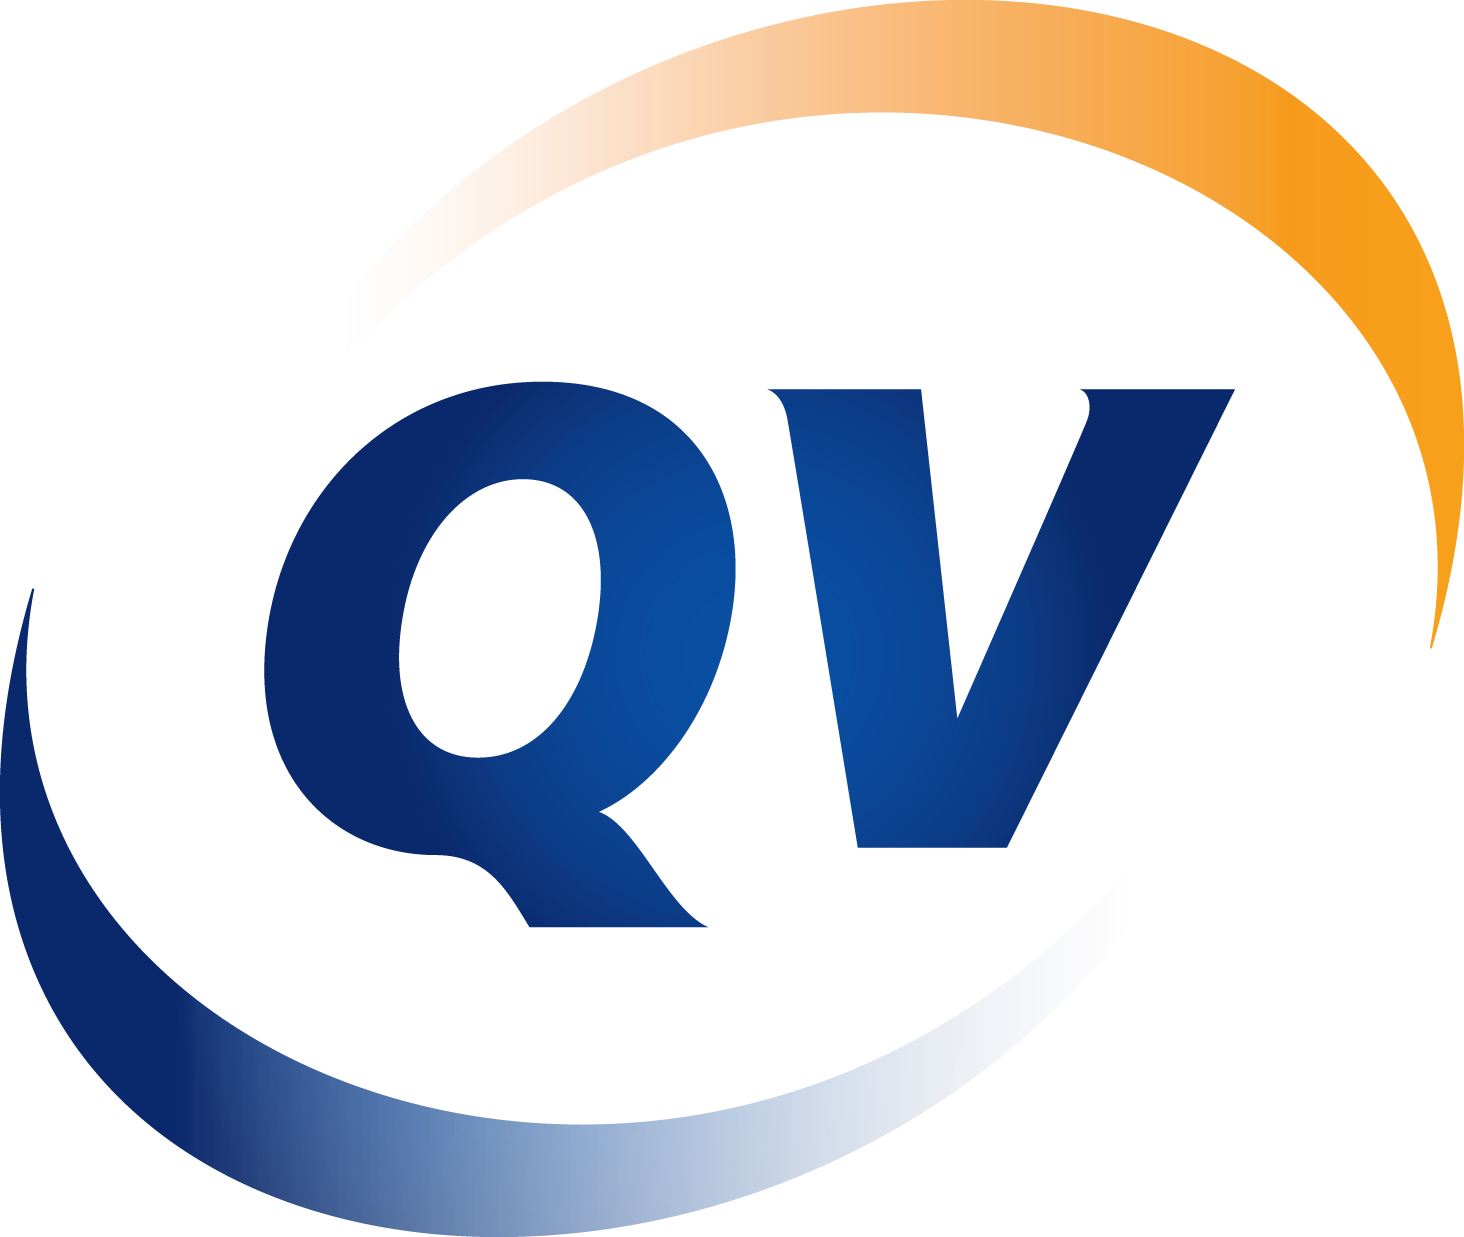 Working With Industry Leaders - Qv Logo Nz (1464x1237)